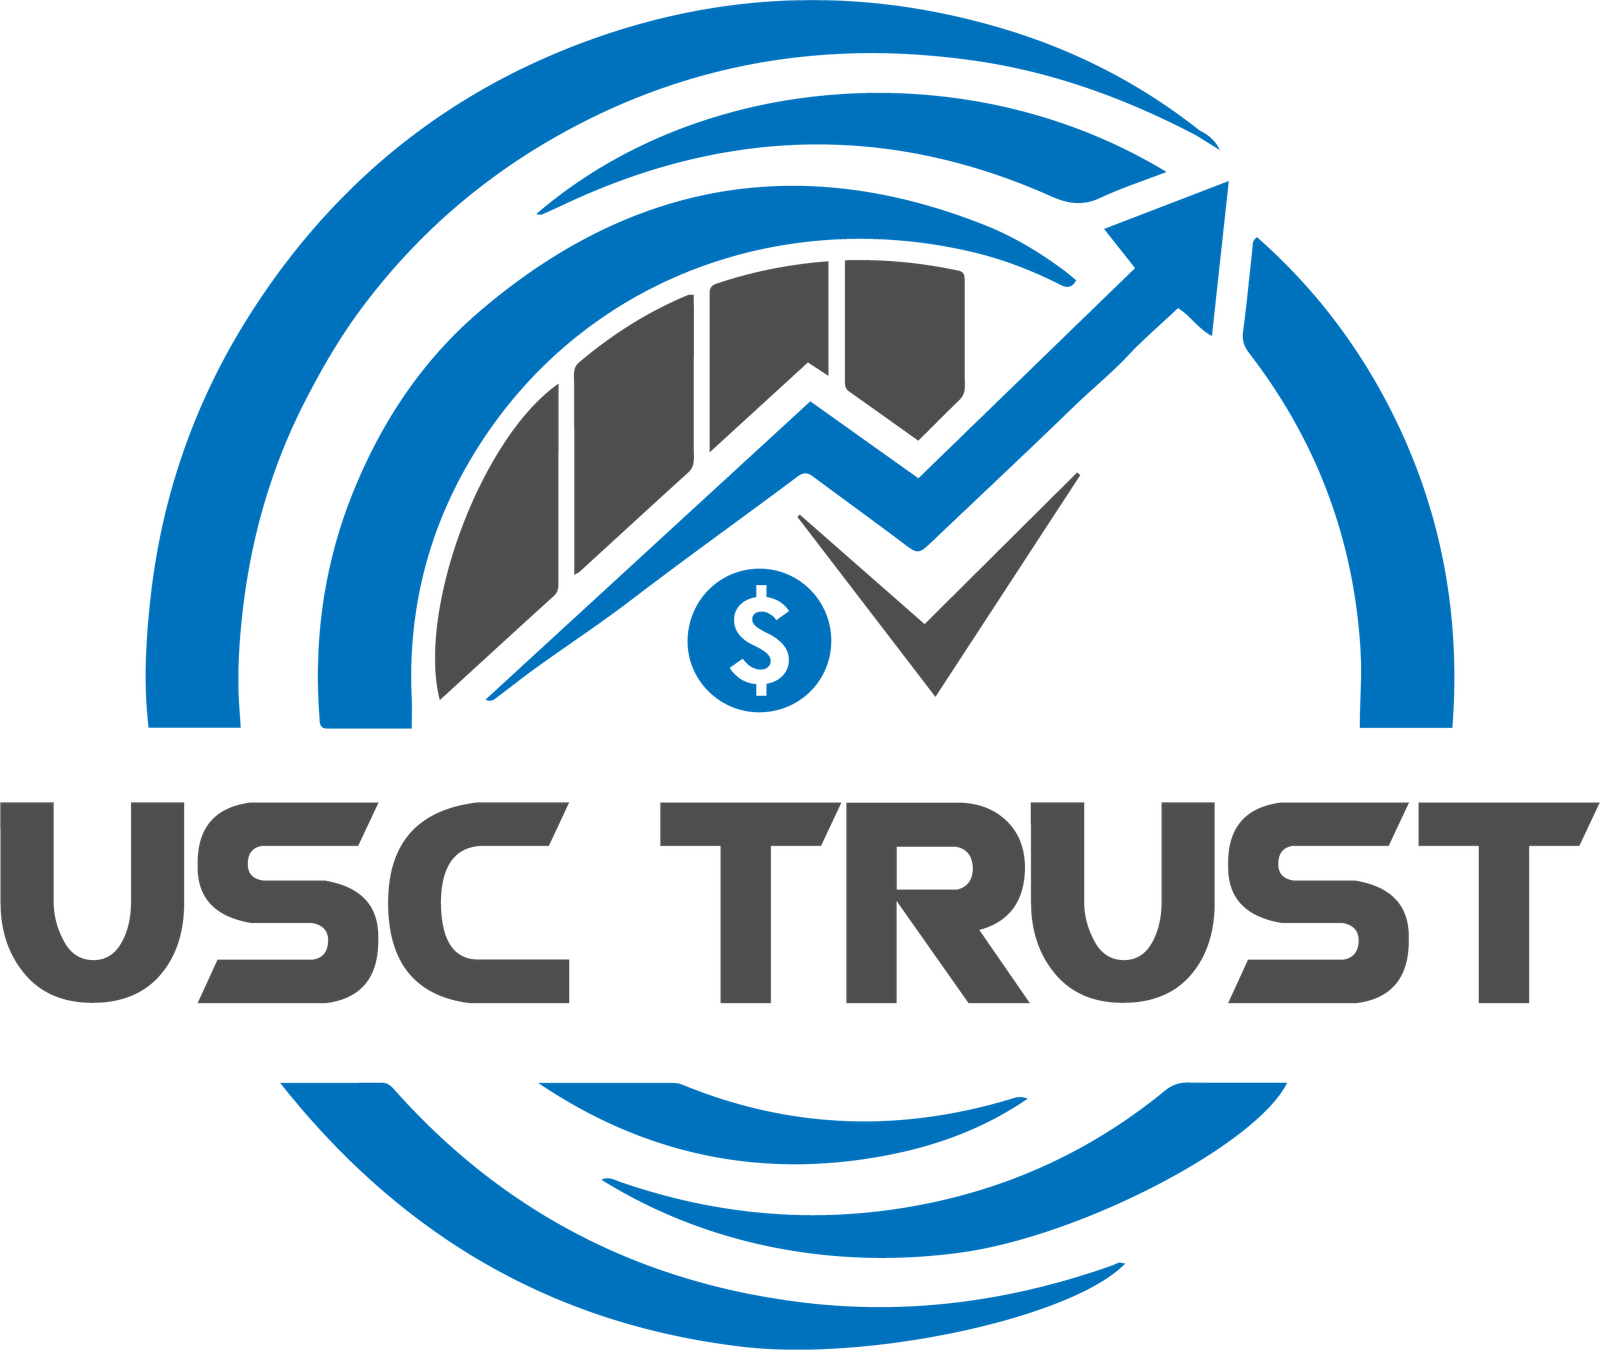 USC TRUST - Financial Innovation Services